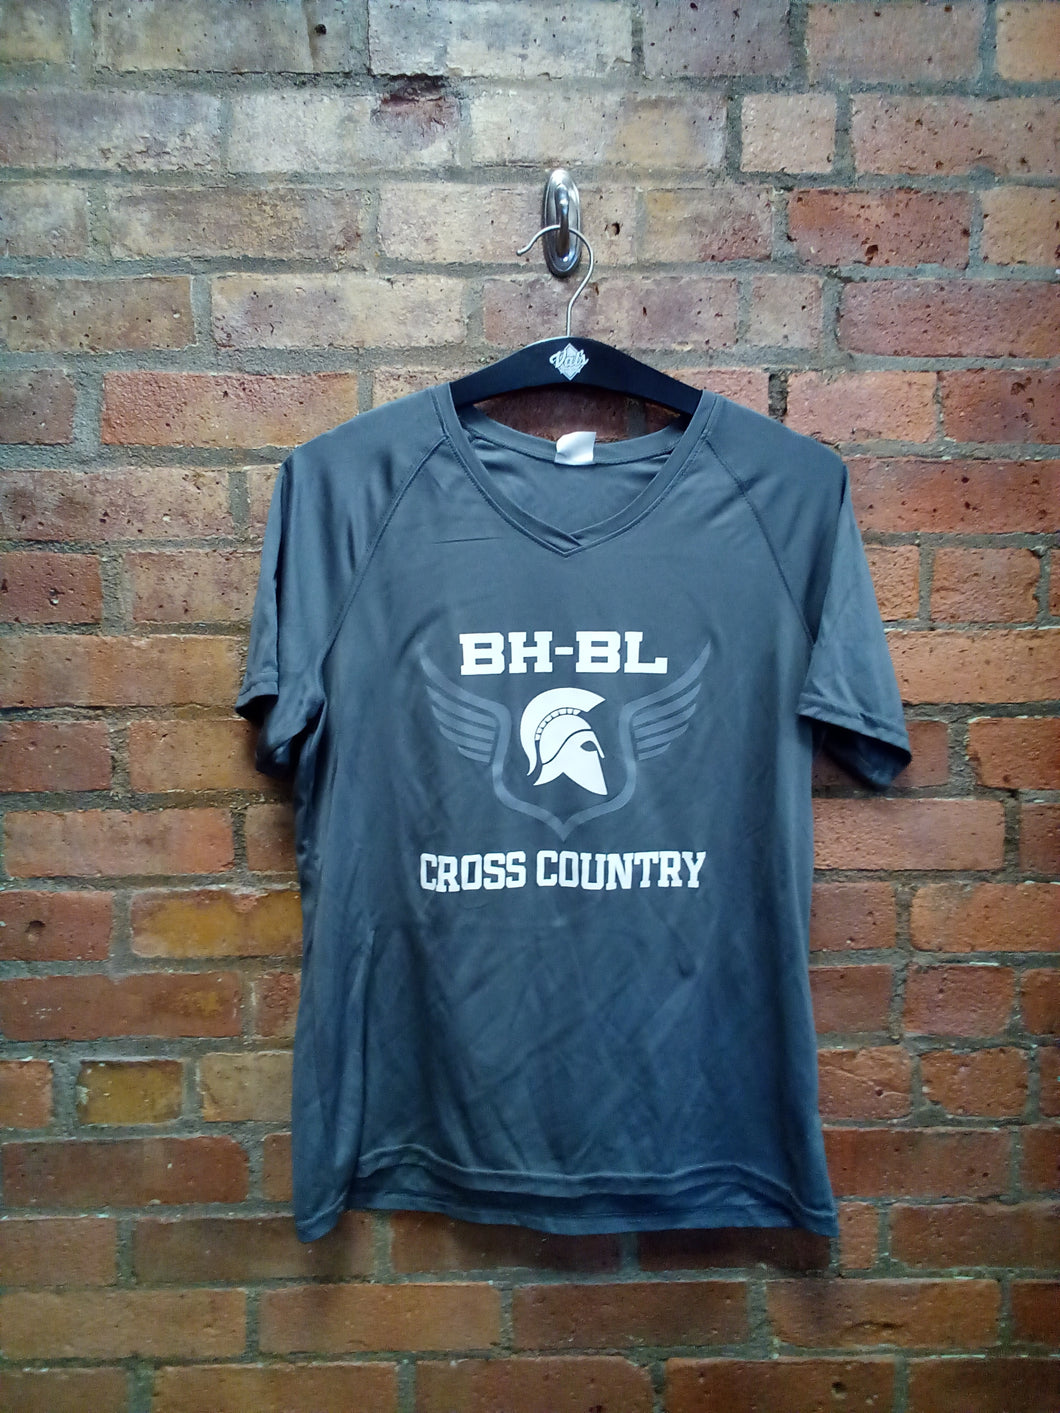 CLEARANCE - BH-BL CROSS COUNTRY LADIES MOISTURE WICKING T-SHIRT - SIZE LARGE